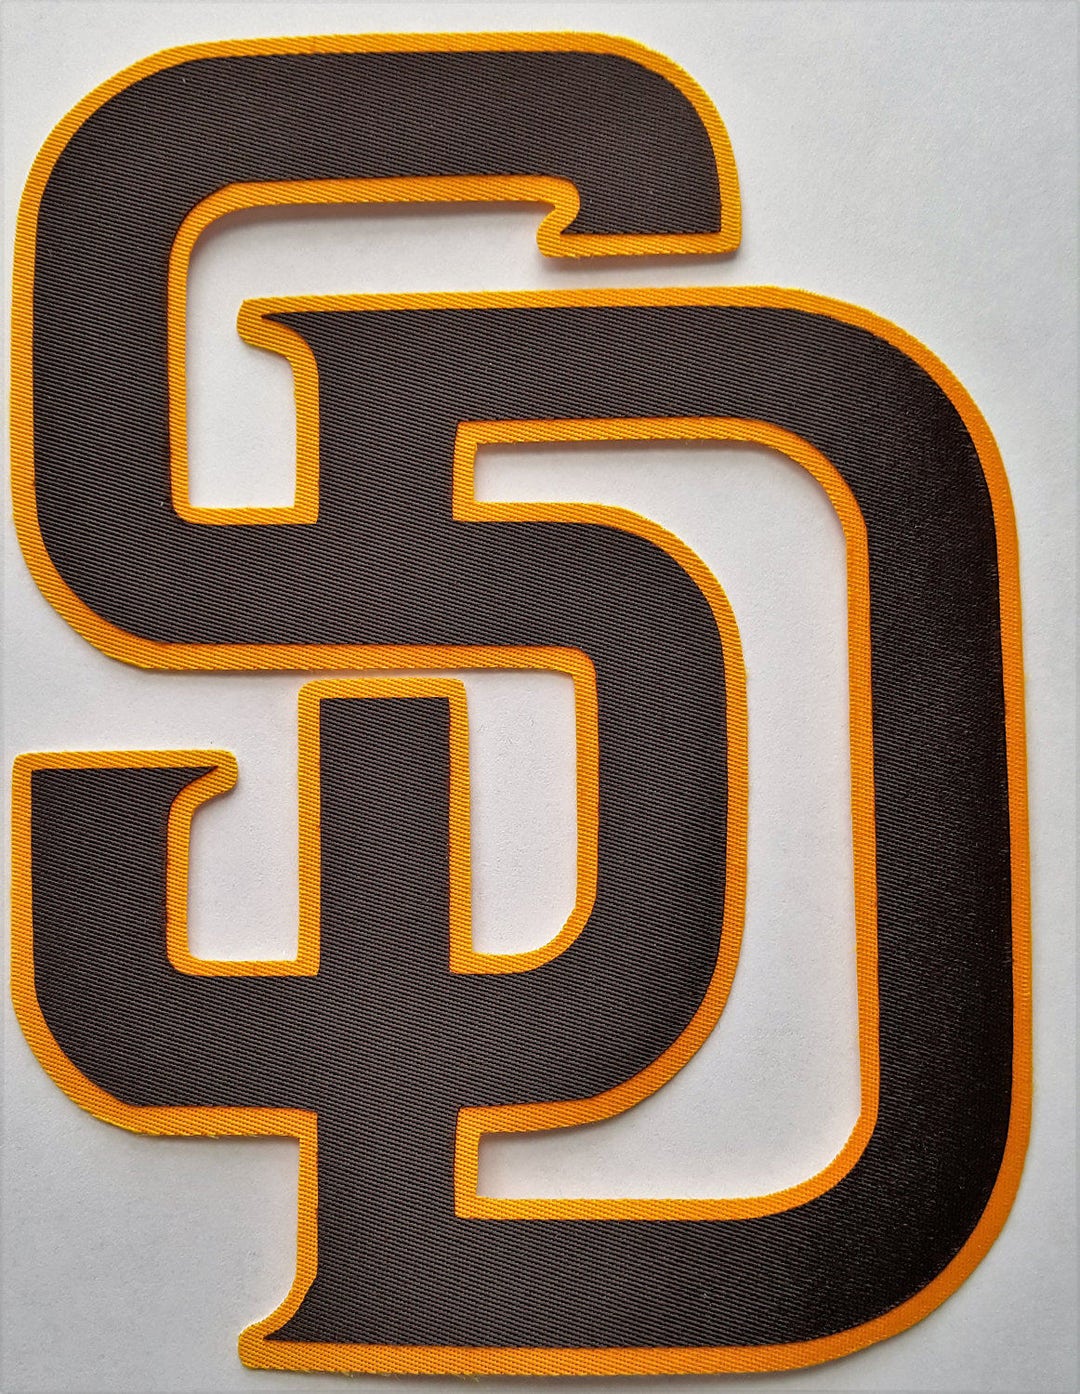 Huge San Diego Padres Iron on Patch - Etsy